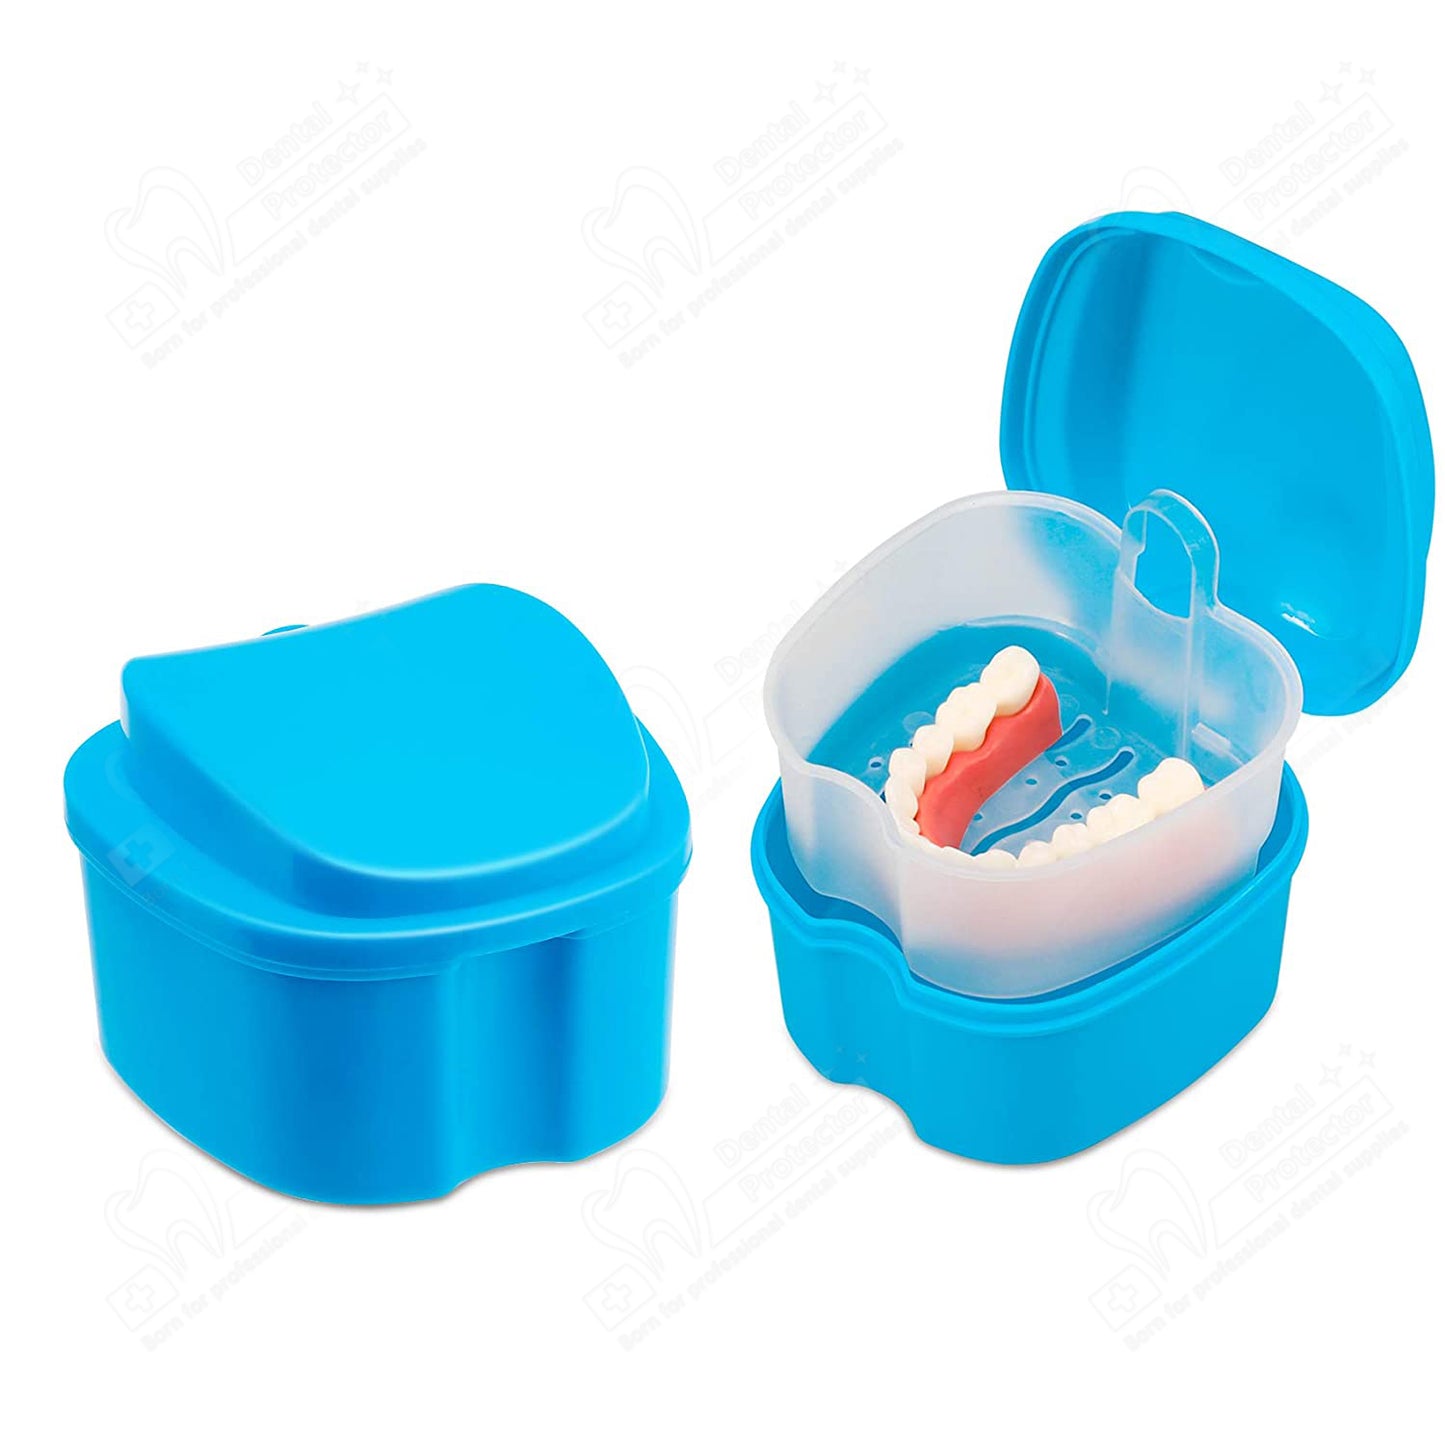 Dental Orthodontic Retainer Case Cleaning with Strainer Basket, Denture Bath Box Soaking Cup Mouthguard Storage Holder - Leak Proof and Lid Waterproof，2 pieces in Pack